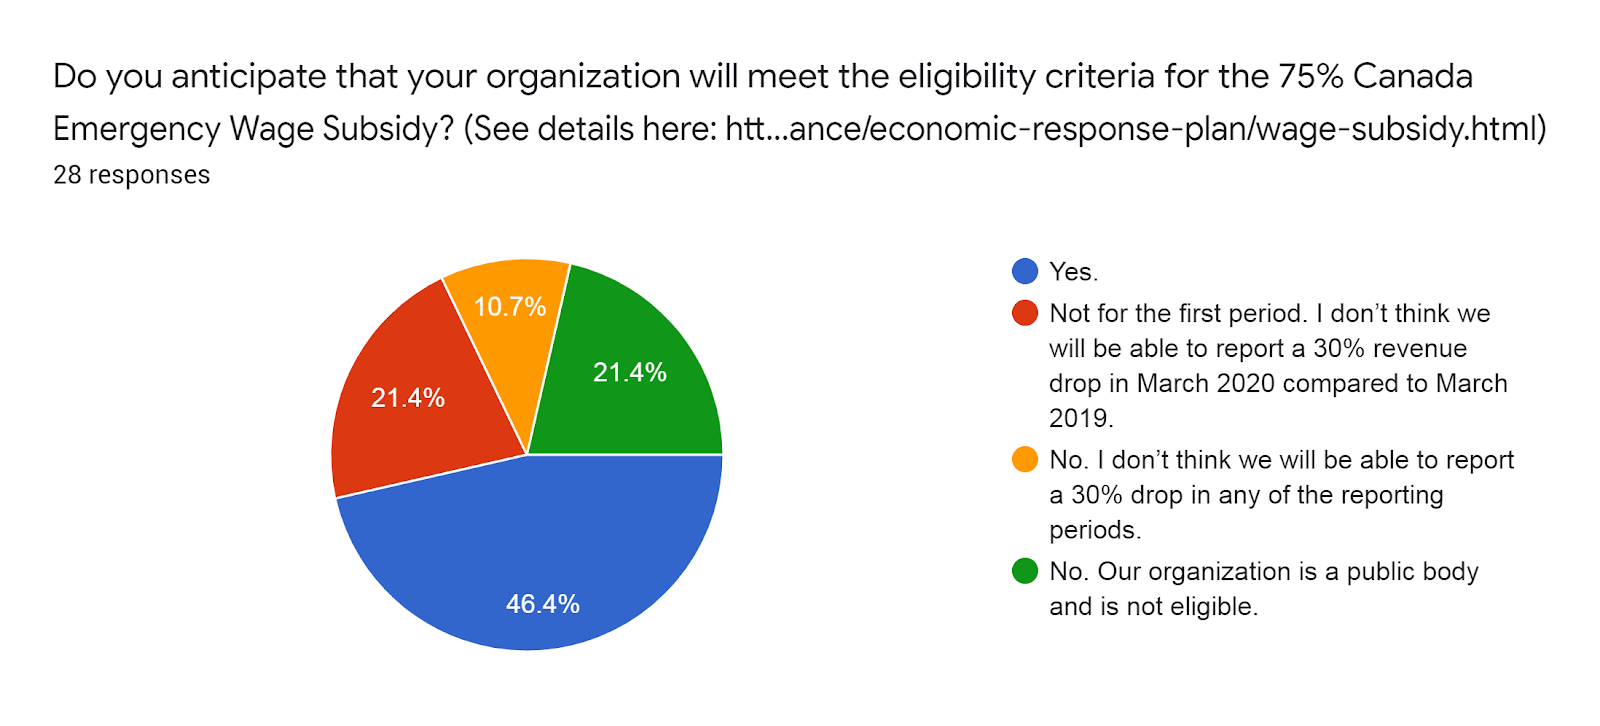 Forms response chart. Question title: Do you anticipate that your organization will meet the eligibility criteria for the 75% Canada Emergency Wage Subsidy? (See details here: https://www.canada.ca/en/department-finance/economic-response-plan/wage-subsidy.html). Number of responses: 28 responses.